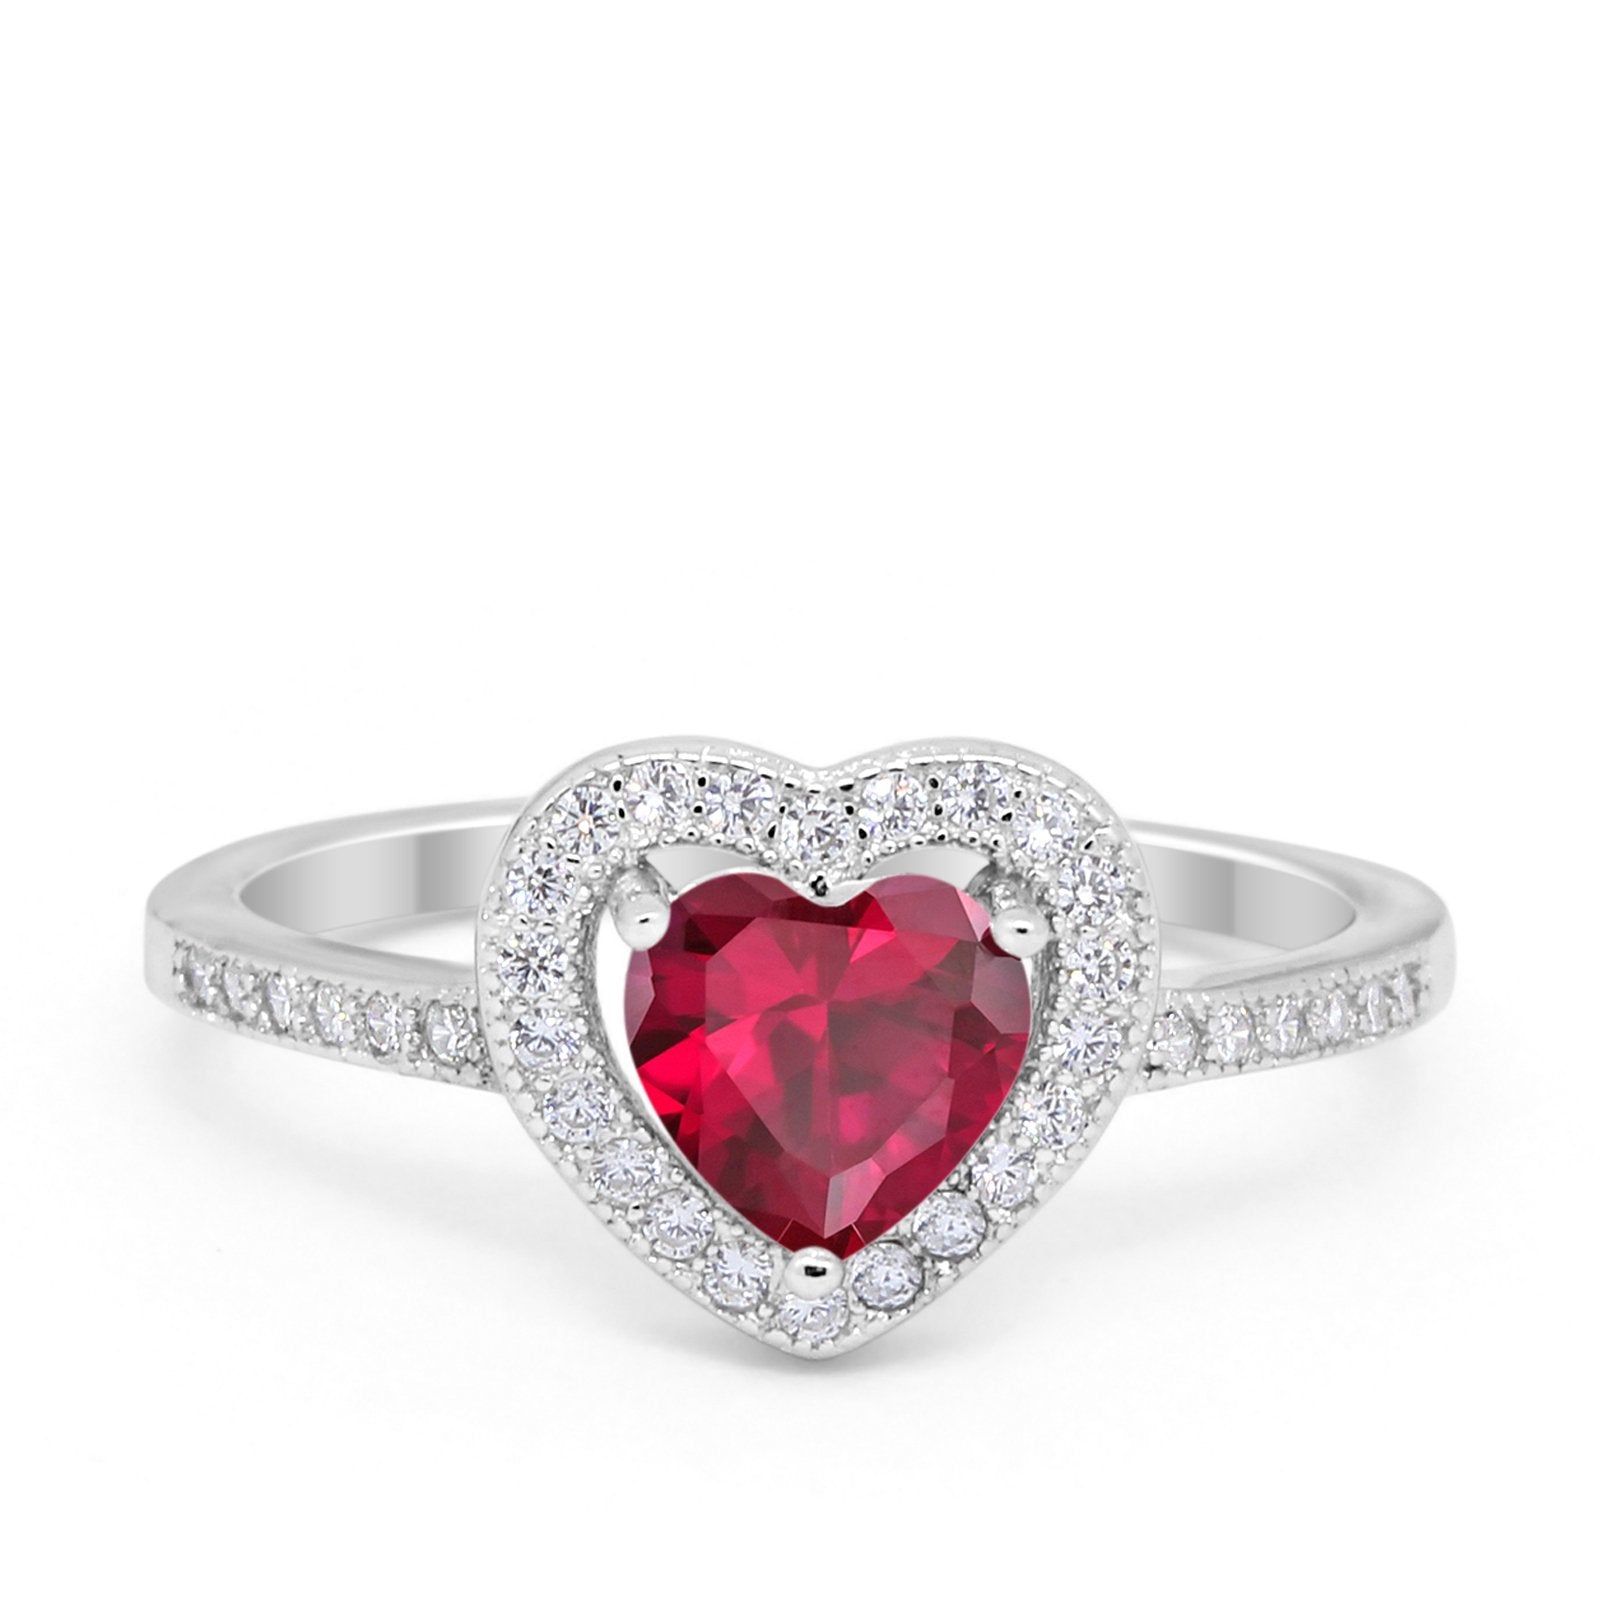 Halo Dazzling Heart Promise Ring Round Simulated CZ 925 Sterling Silver